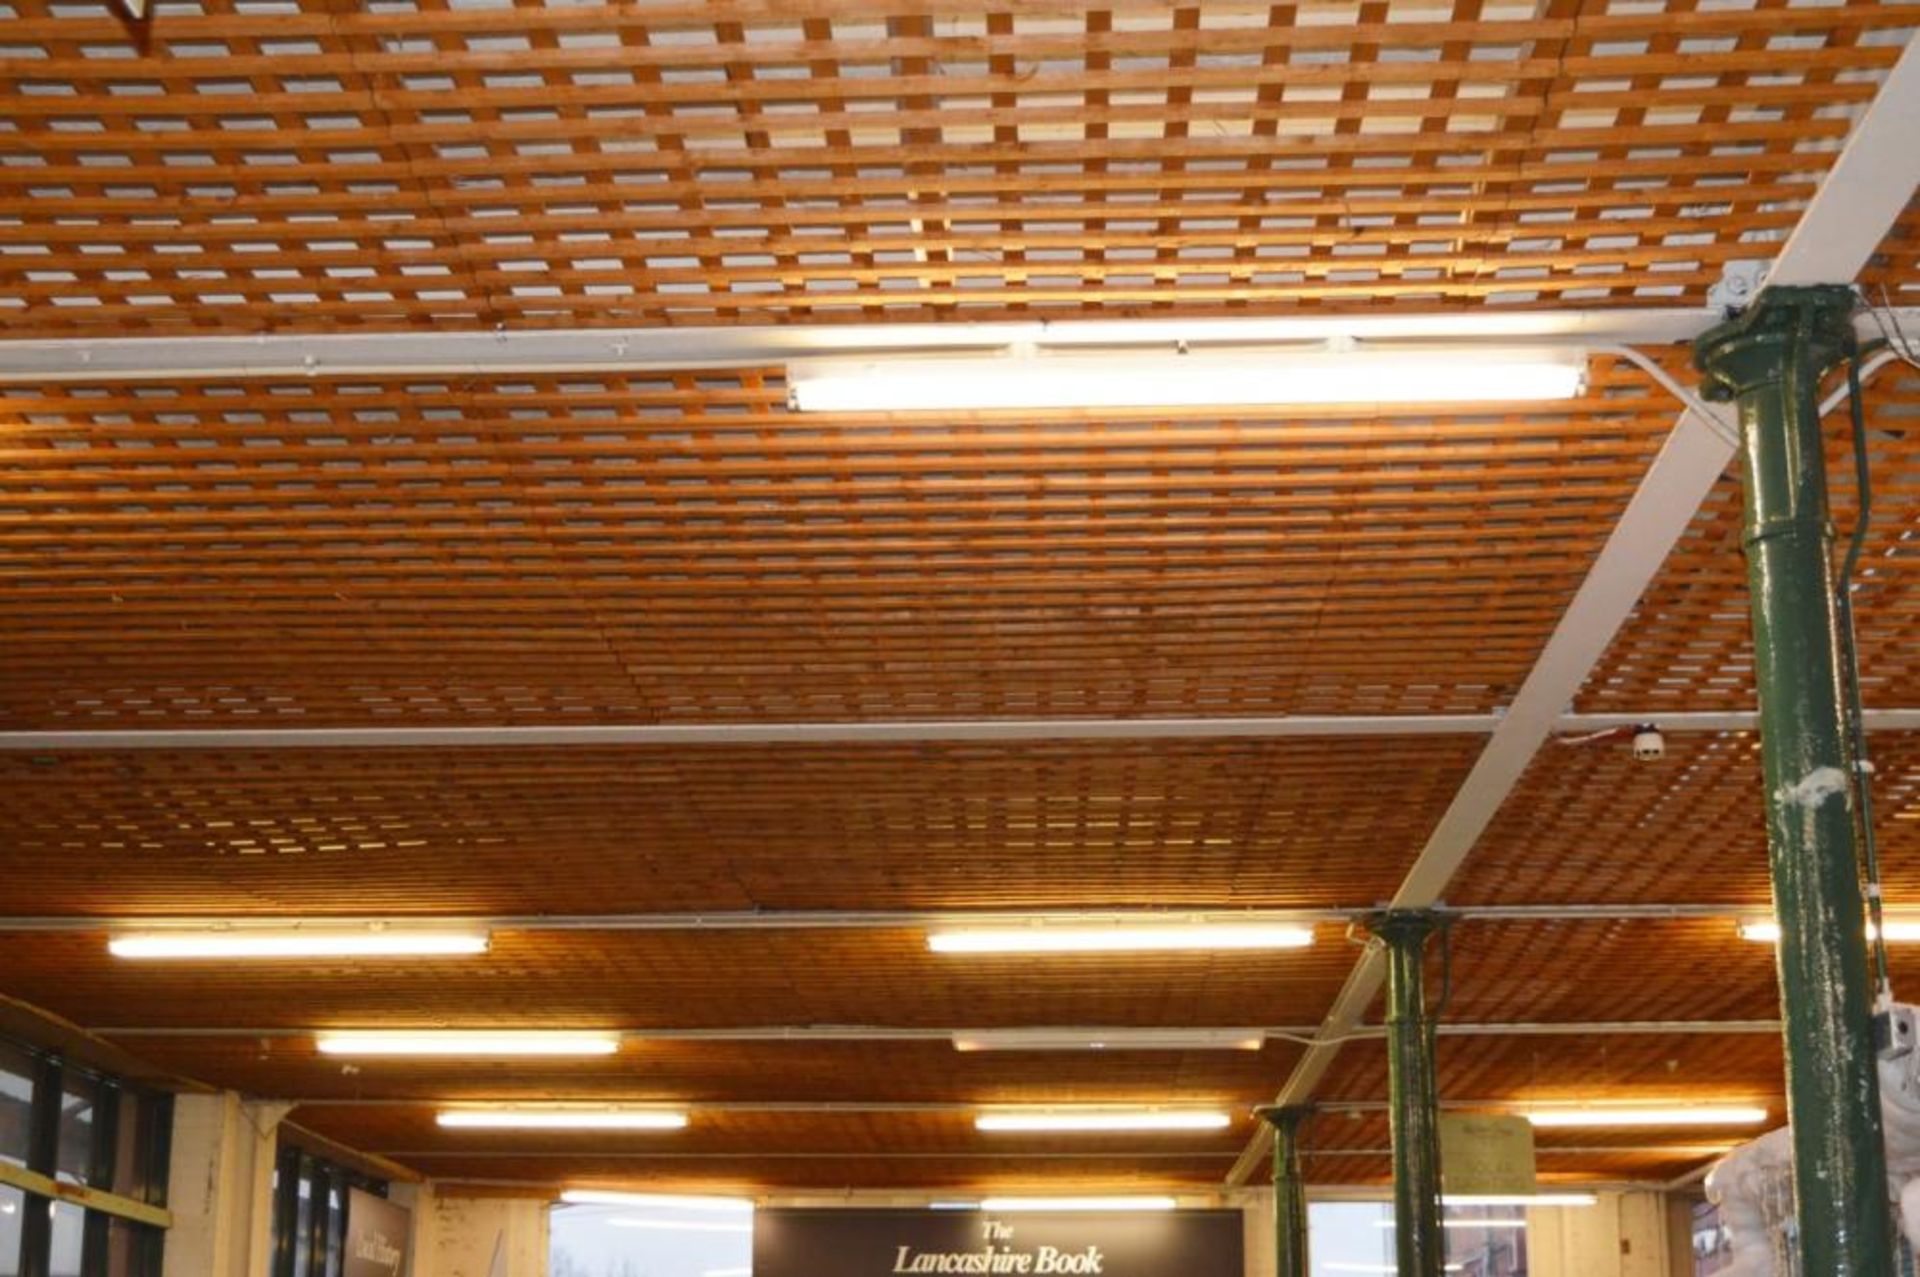 100 x Garden Trellis Panels - Indoor Use Only in Good Condition - Approx Size of Each 190 x 150 cms - Image 2 of 2